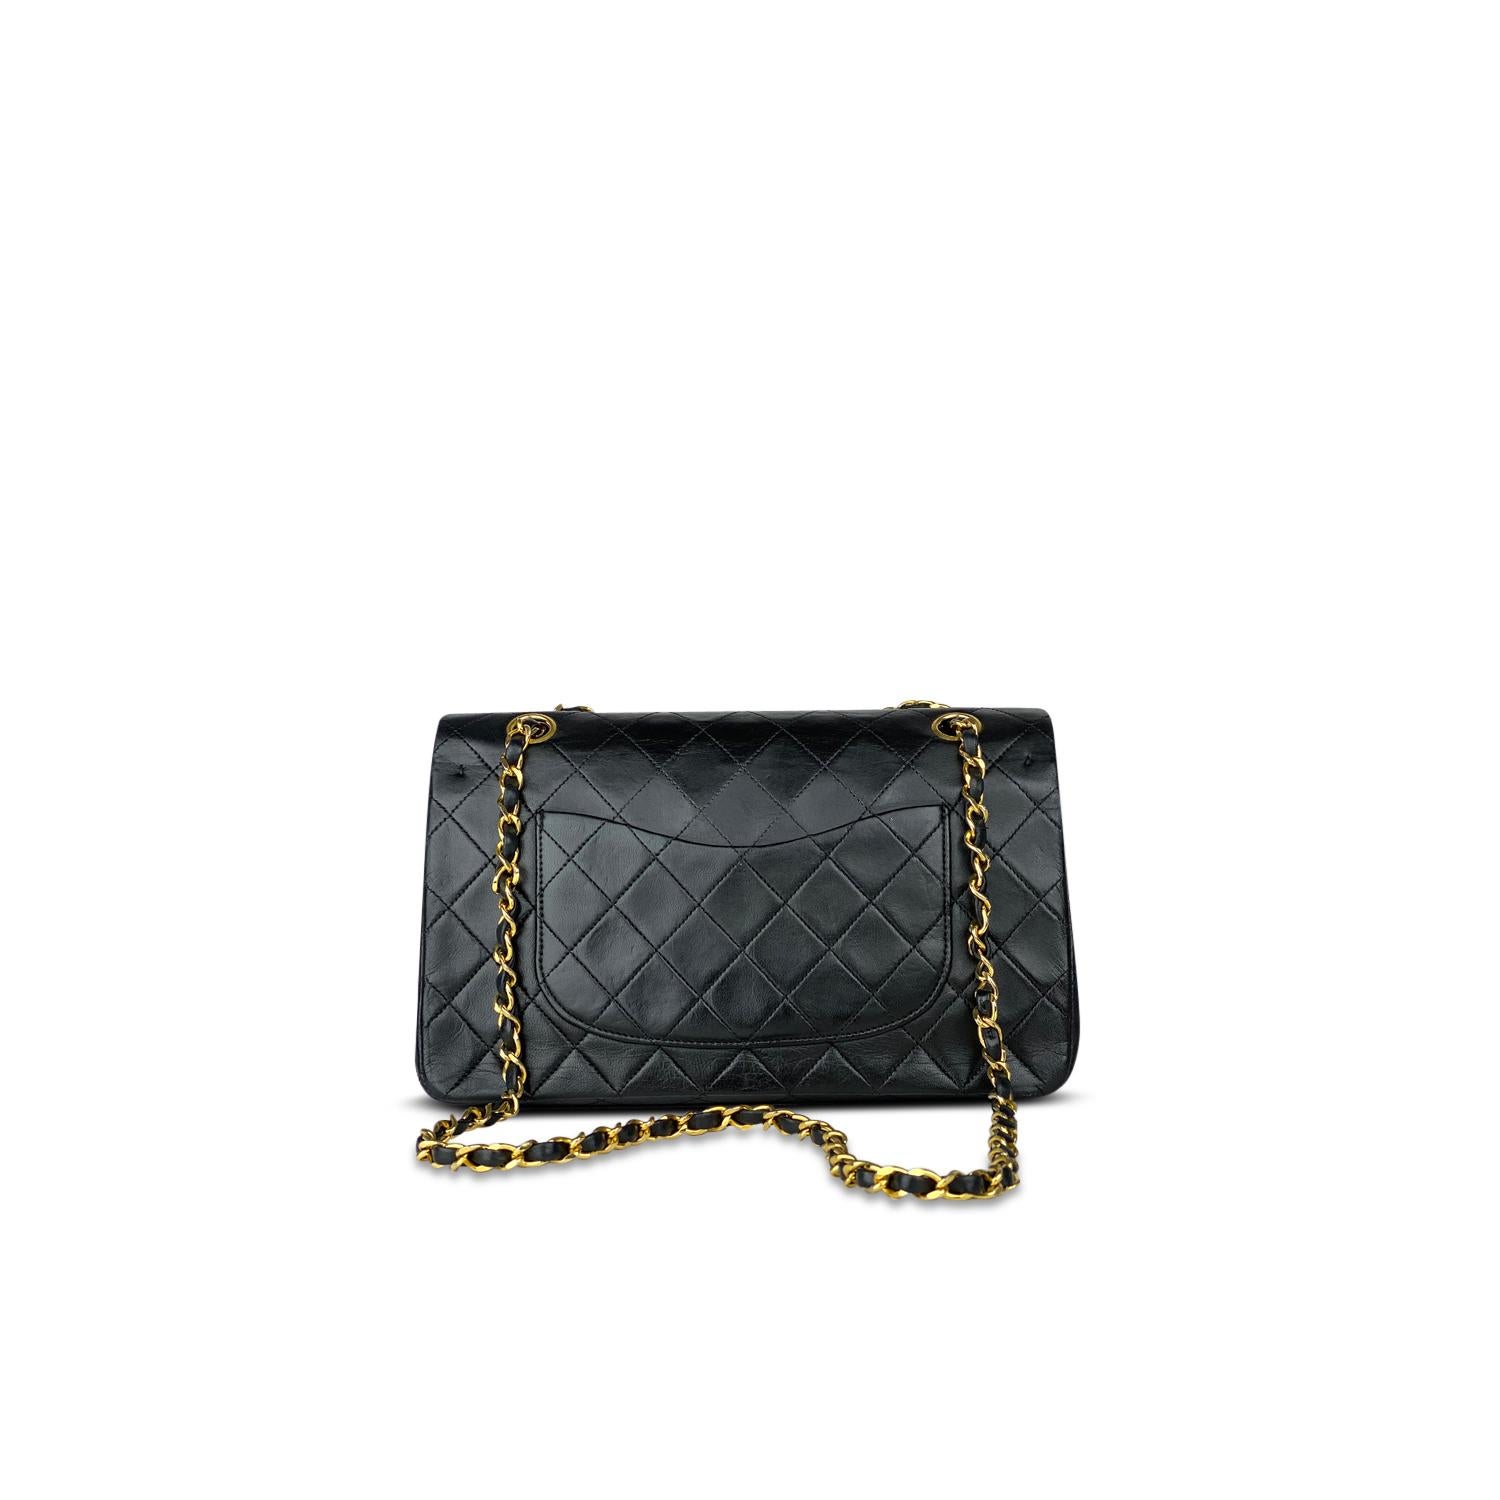 Chanel Medium Black Classic Double Flap Bag In Good Condition For Sale In Sundbyberg, SE